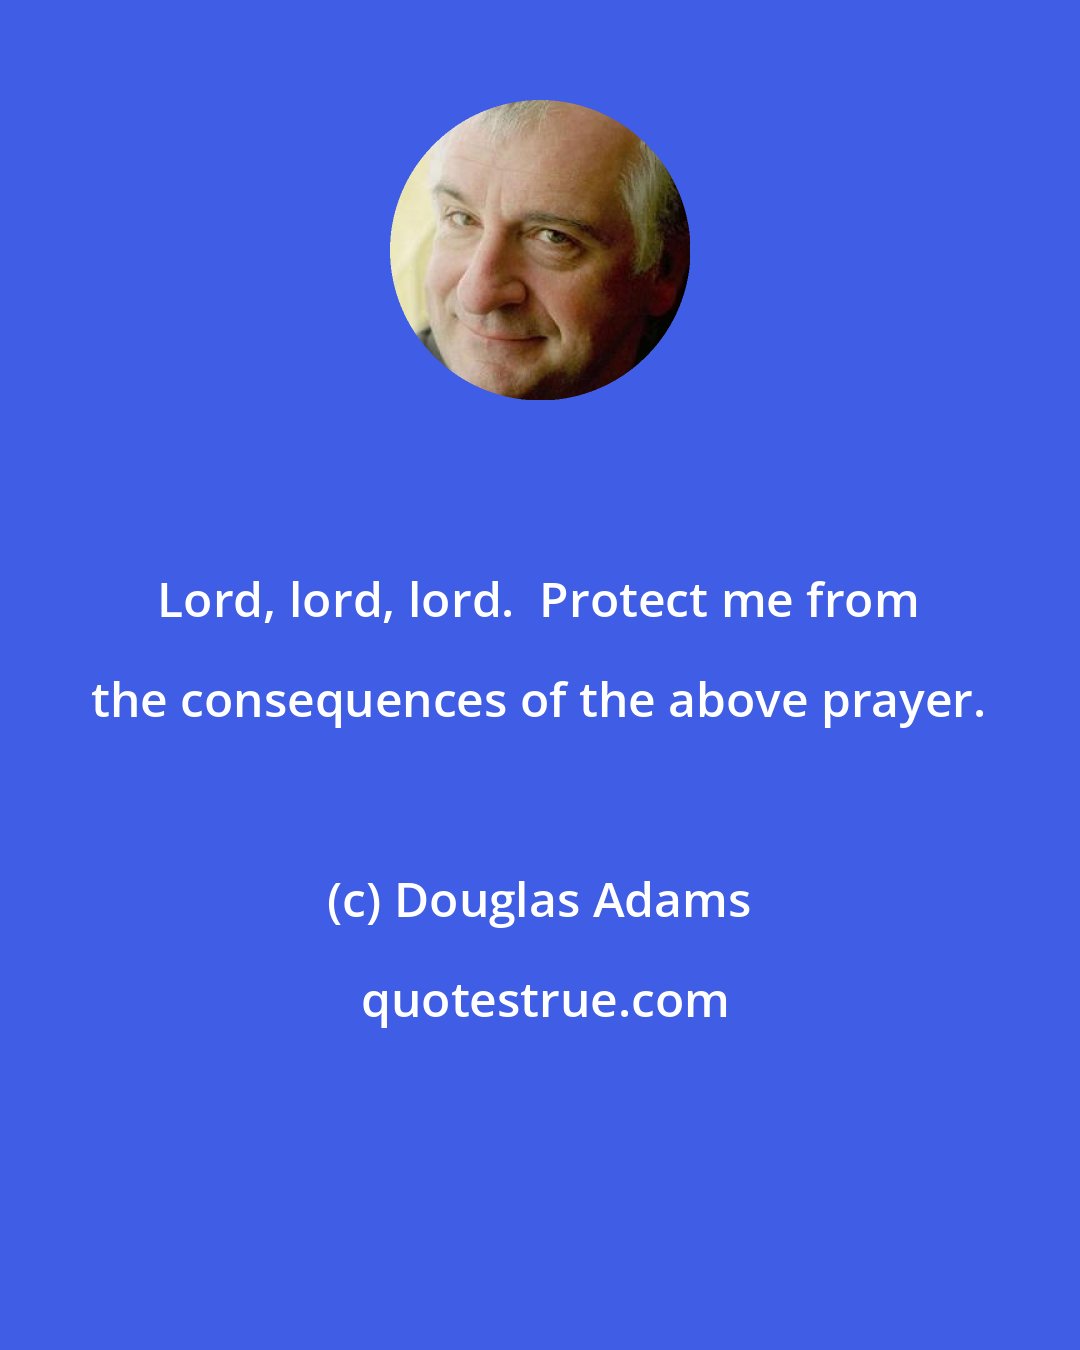 Douglas Adams: Lord, lord, lord.  Protect me from the consequences of the above prayer.